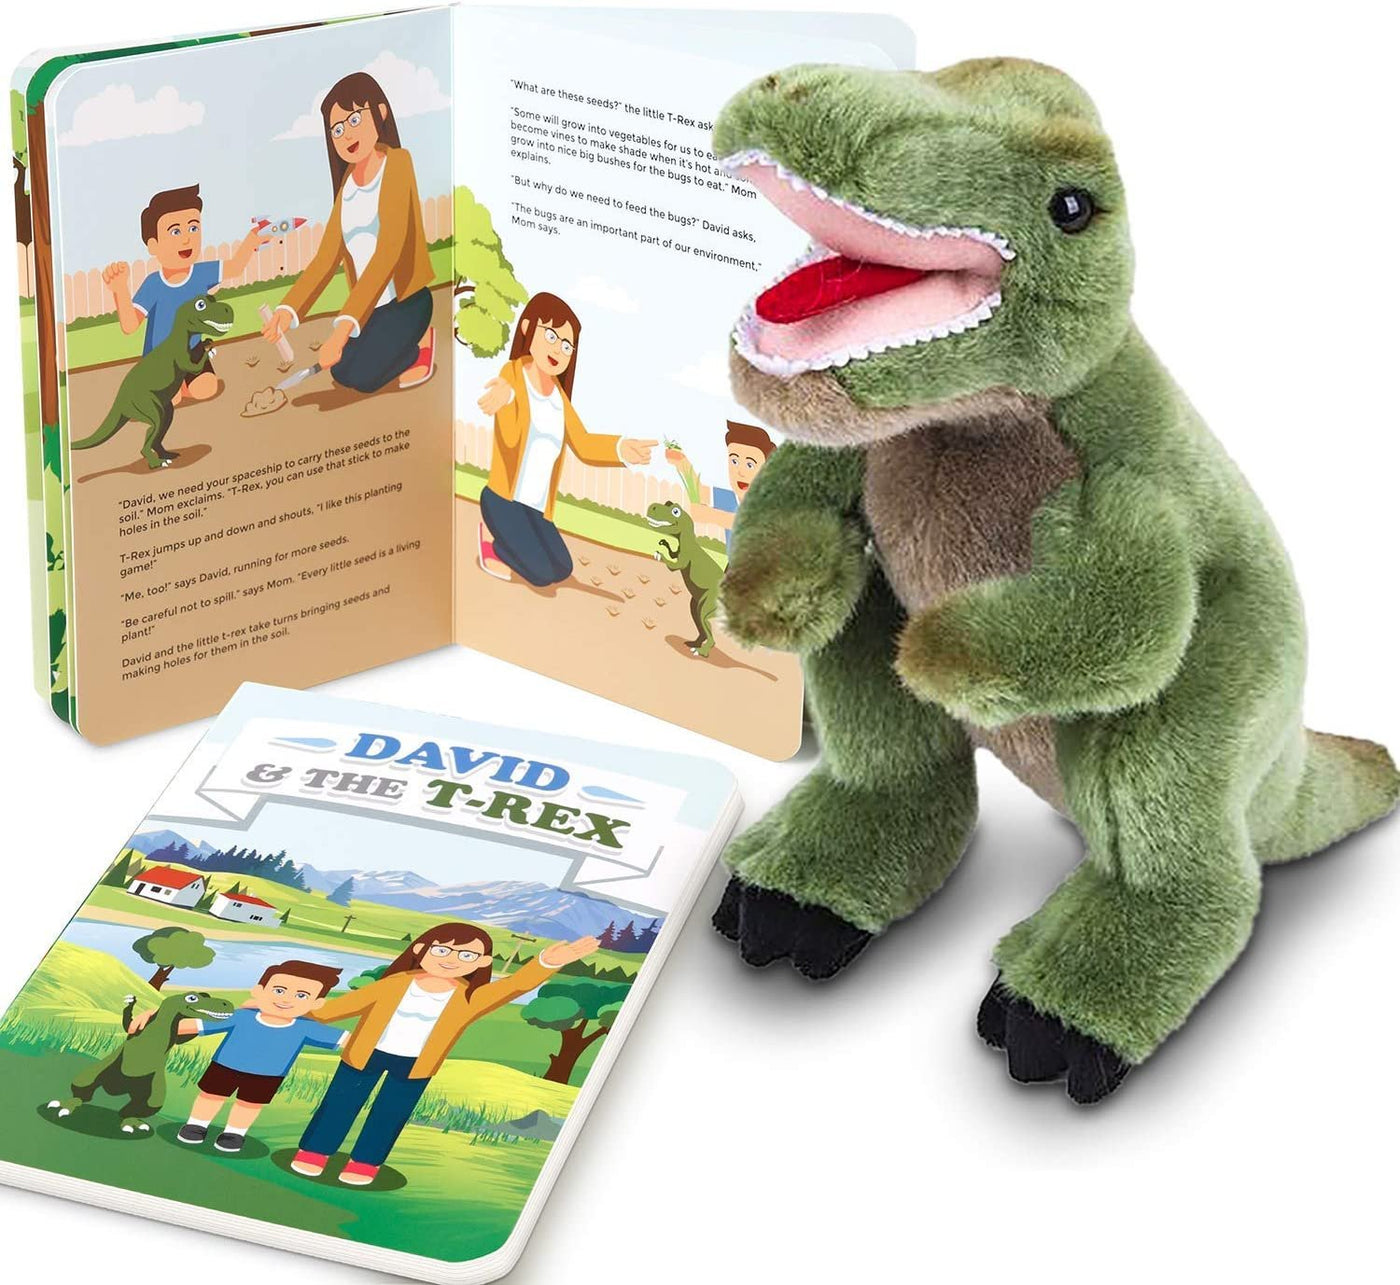 Educational Book for Kids with T-Rex Dinosaur Plush Toy, Fun Children’s Learning Booklet About The Environment, Super-Soft and Cuddly Stuffed Animal, Best Gift for Boys and Girls